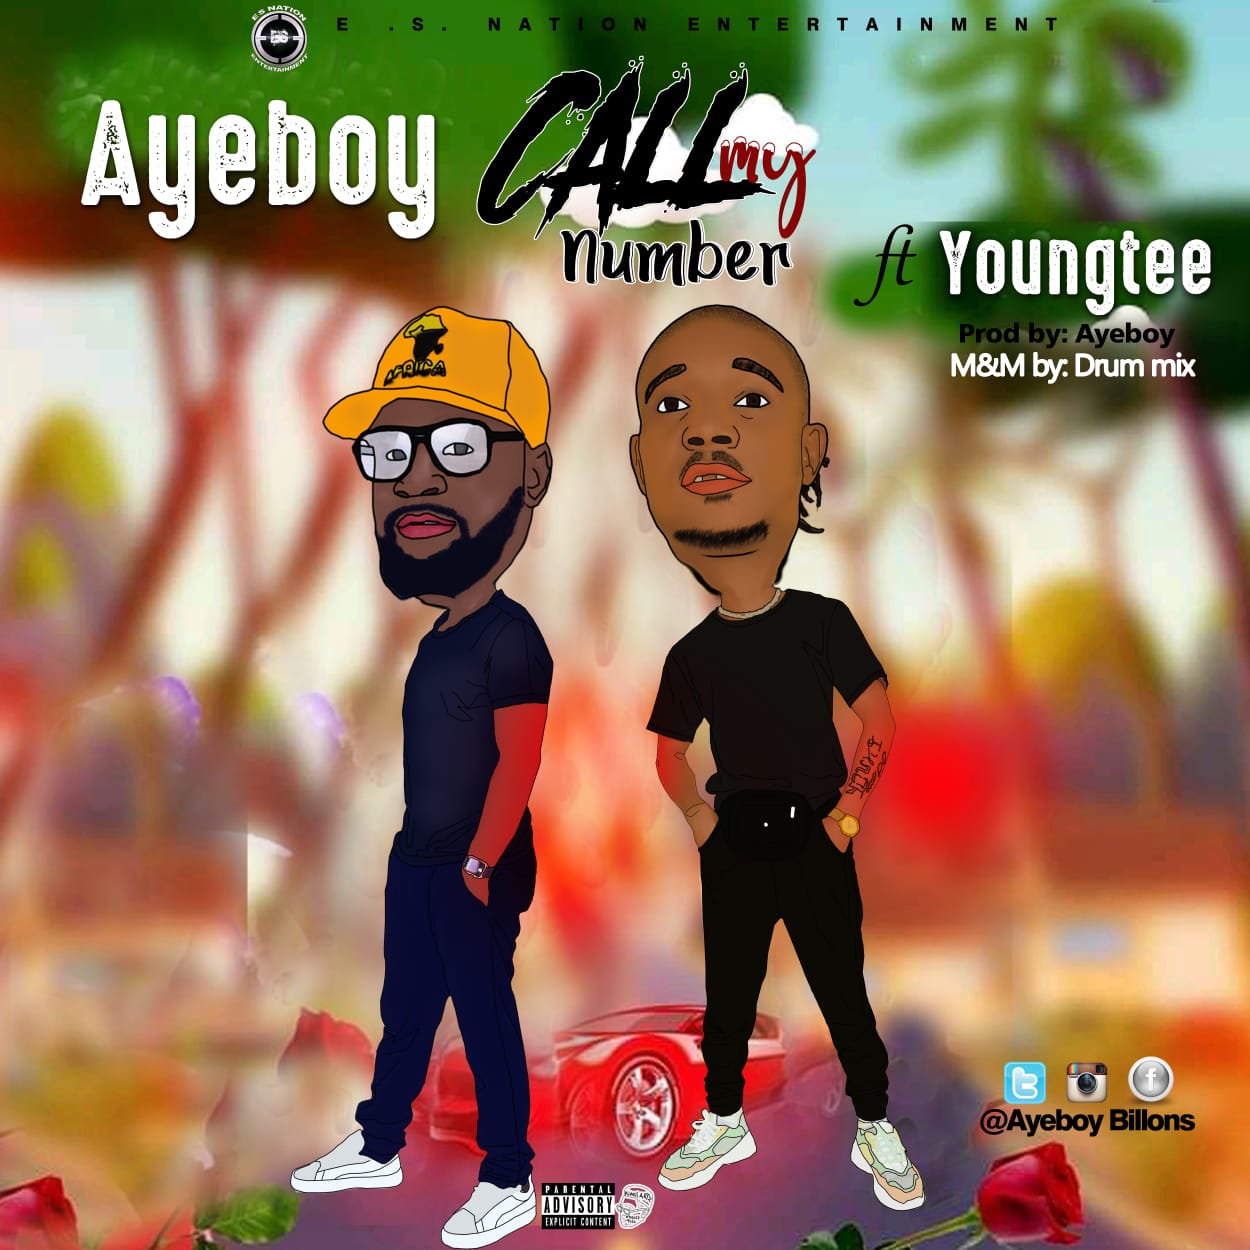 Ayeboy - "Call My Number" Feat YoungTee 1